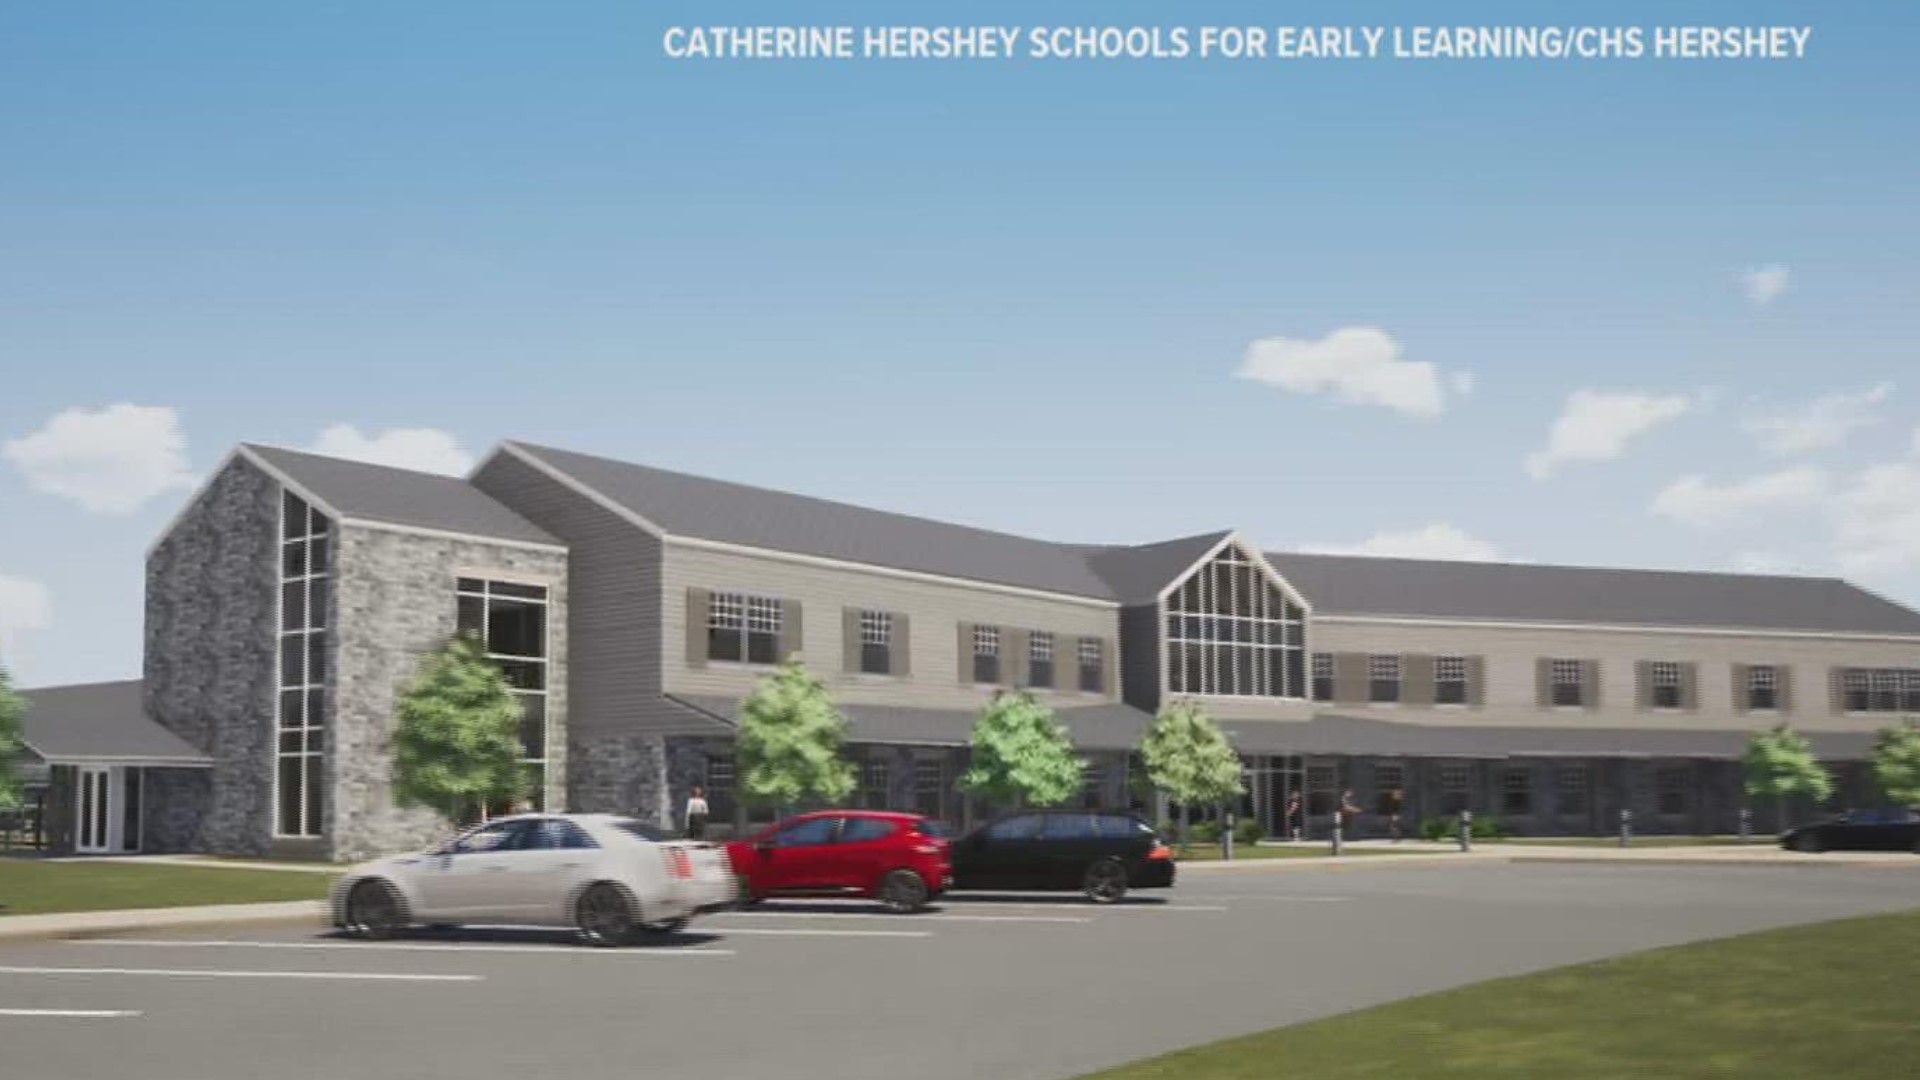 Plans were announced to build a new early childhood resource center in Dauphin County that will support kids under 5 who come from at-risk backgrounds.